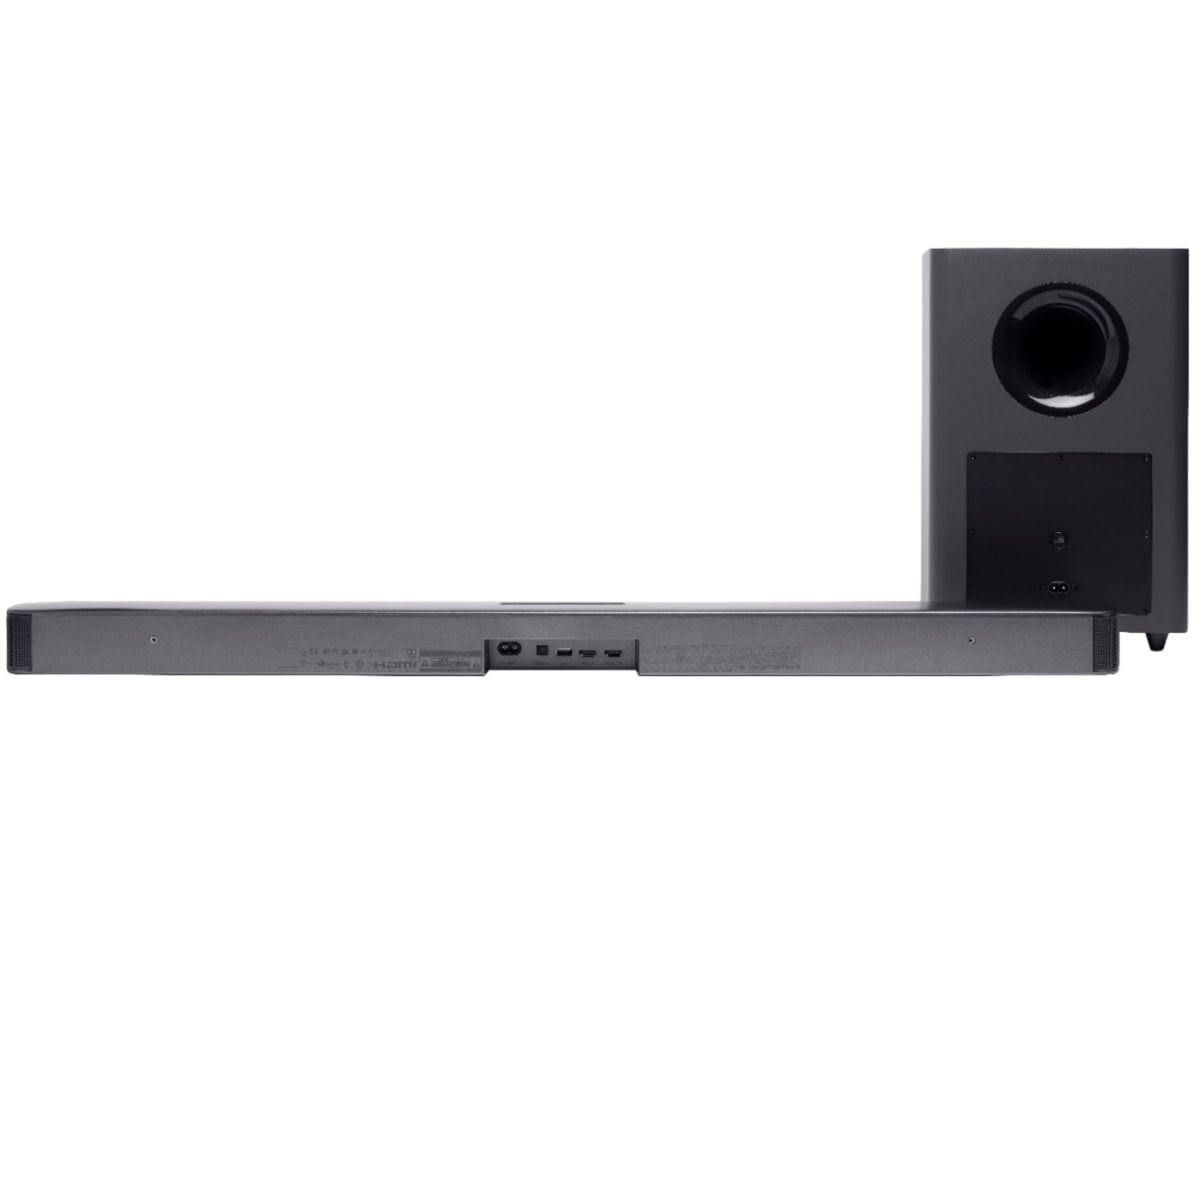 6395178Cv13D Scaled Jbl &Lt;H1&Gt;Jbl - 2.1-Channel Soundbar With Wireless Subwoofer And Dolby Digital - Black&Lt;/H1&Gt; Elevate Your Cinematic Experience With This 2.1-Channel Jbl Bar Deep Bass Soundbar. The Wireless Subwoofer And Set Of Tweeters Fill Your Room With Immersive Audio, While Bluetooth Connectivity Lets You Stream Music Wirelessly. This Jbl Bar Deep Bass Soundbar Features A Low-Profile Design For A Contemporary Look, And Built-In Dolby Digital Offers Increased Clarity. Jbl Soundbar Jbl - 2.1-Channel Soundbar With Wireless Subwoofer And Dolby Digital - Black